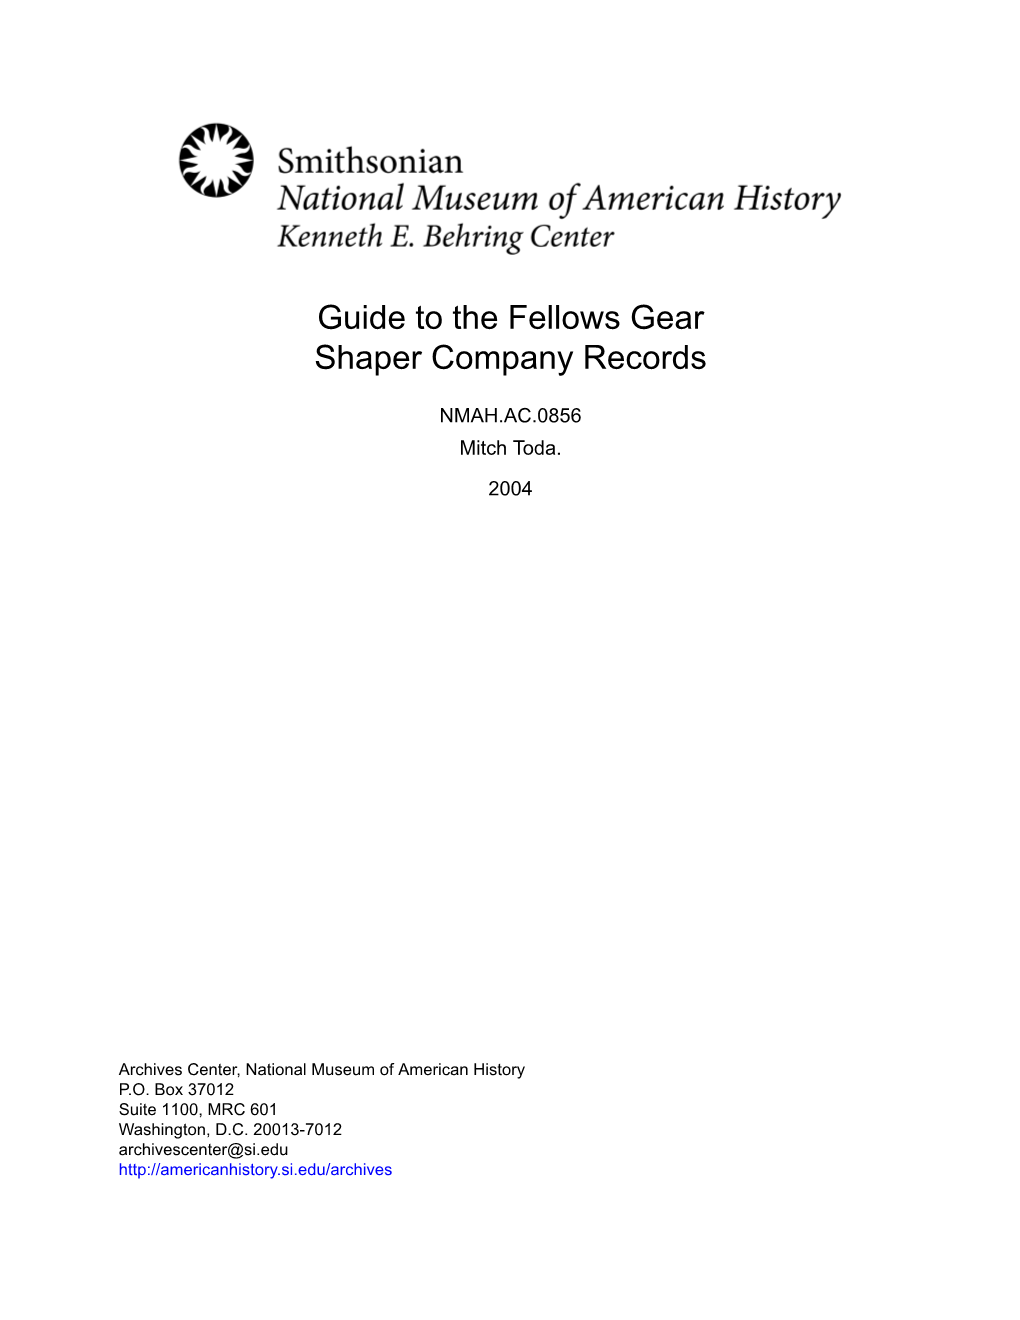 Guide to the Fellows Gear Shaper Company Records